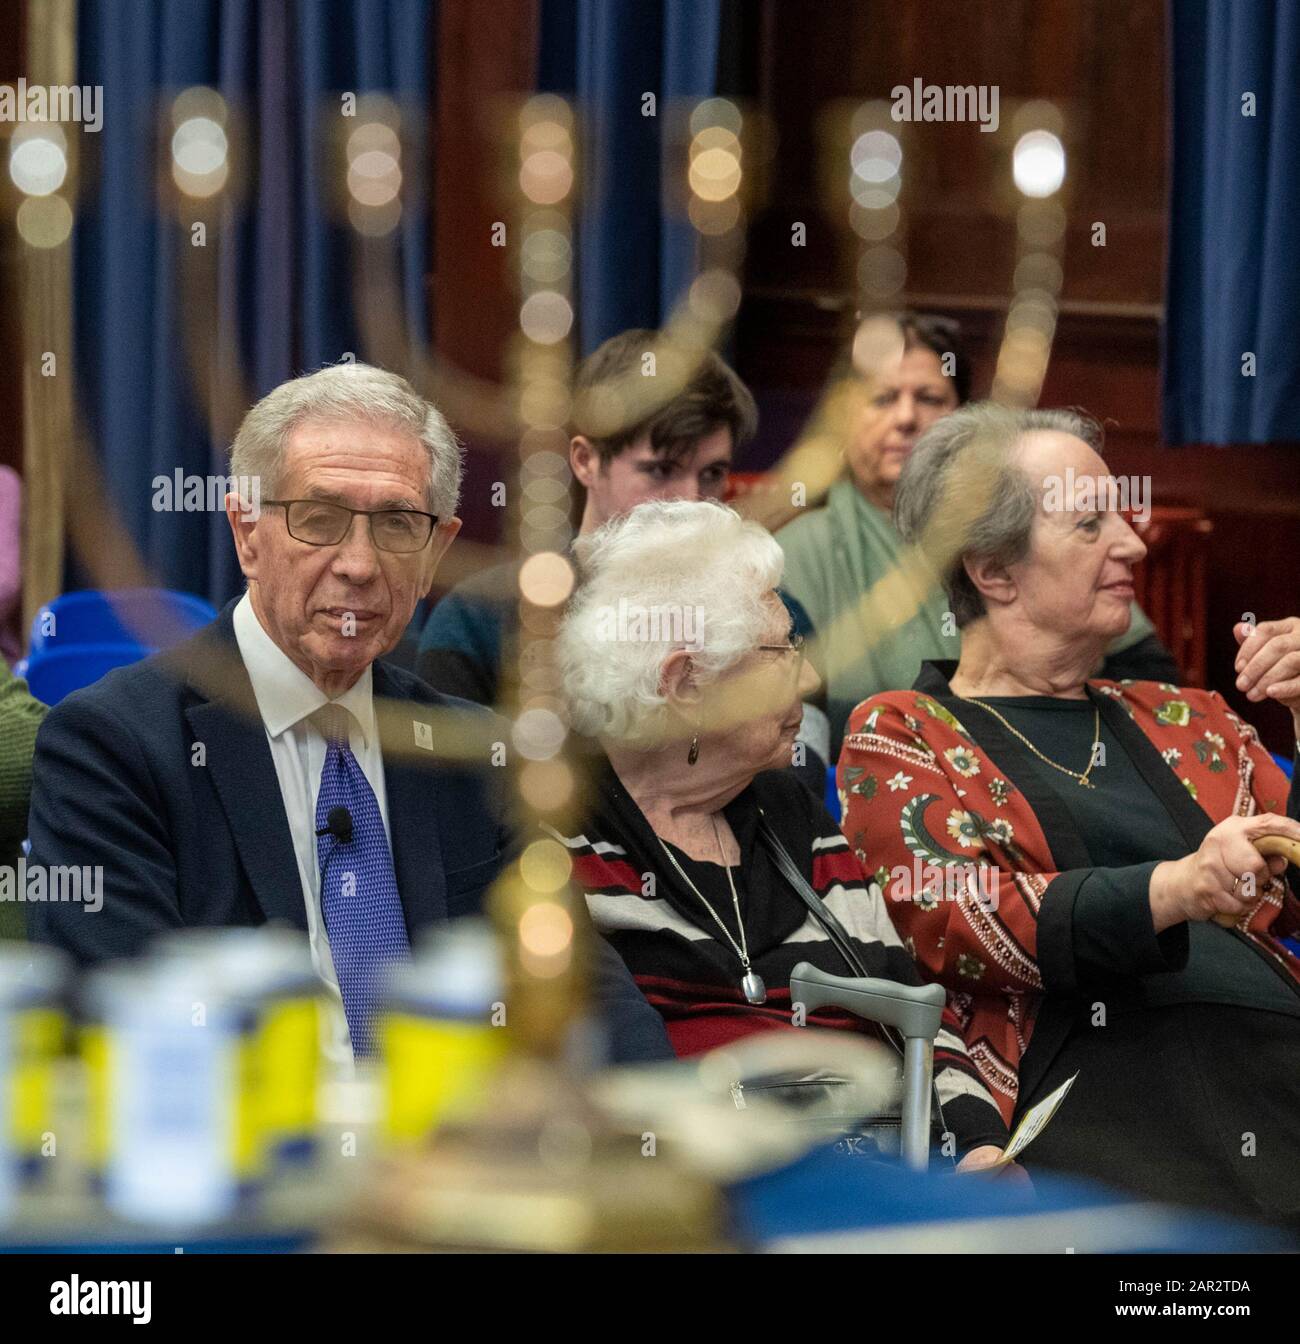 Brentwood Essex 25th Jan. 2020 Holocuast Merorial Day Service at Brentwood County High School Brentwood Essex pictured Ernest Simon, guest speaker and holocaust survivor/Kinder transport refugee (center with glasses) Credit: Ian Davidson/Alamy Live News Stock Photo